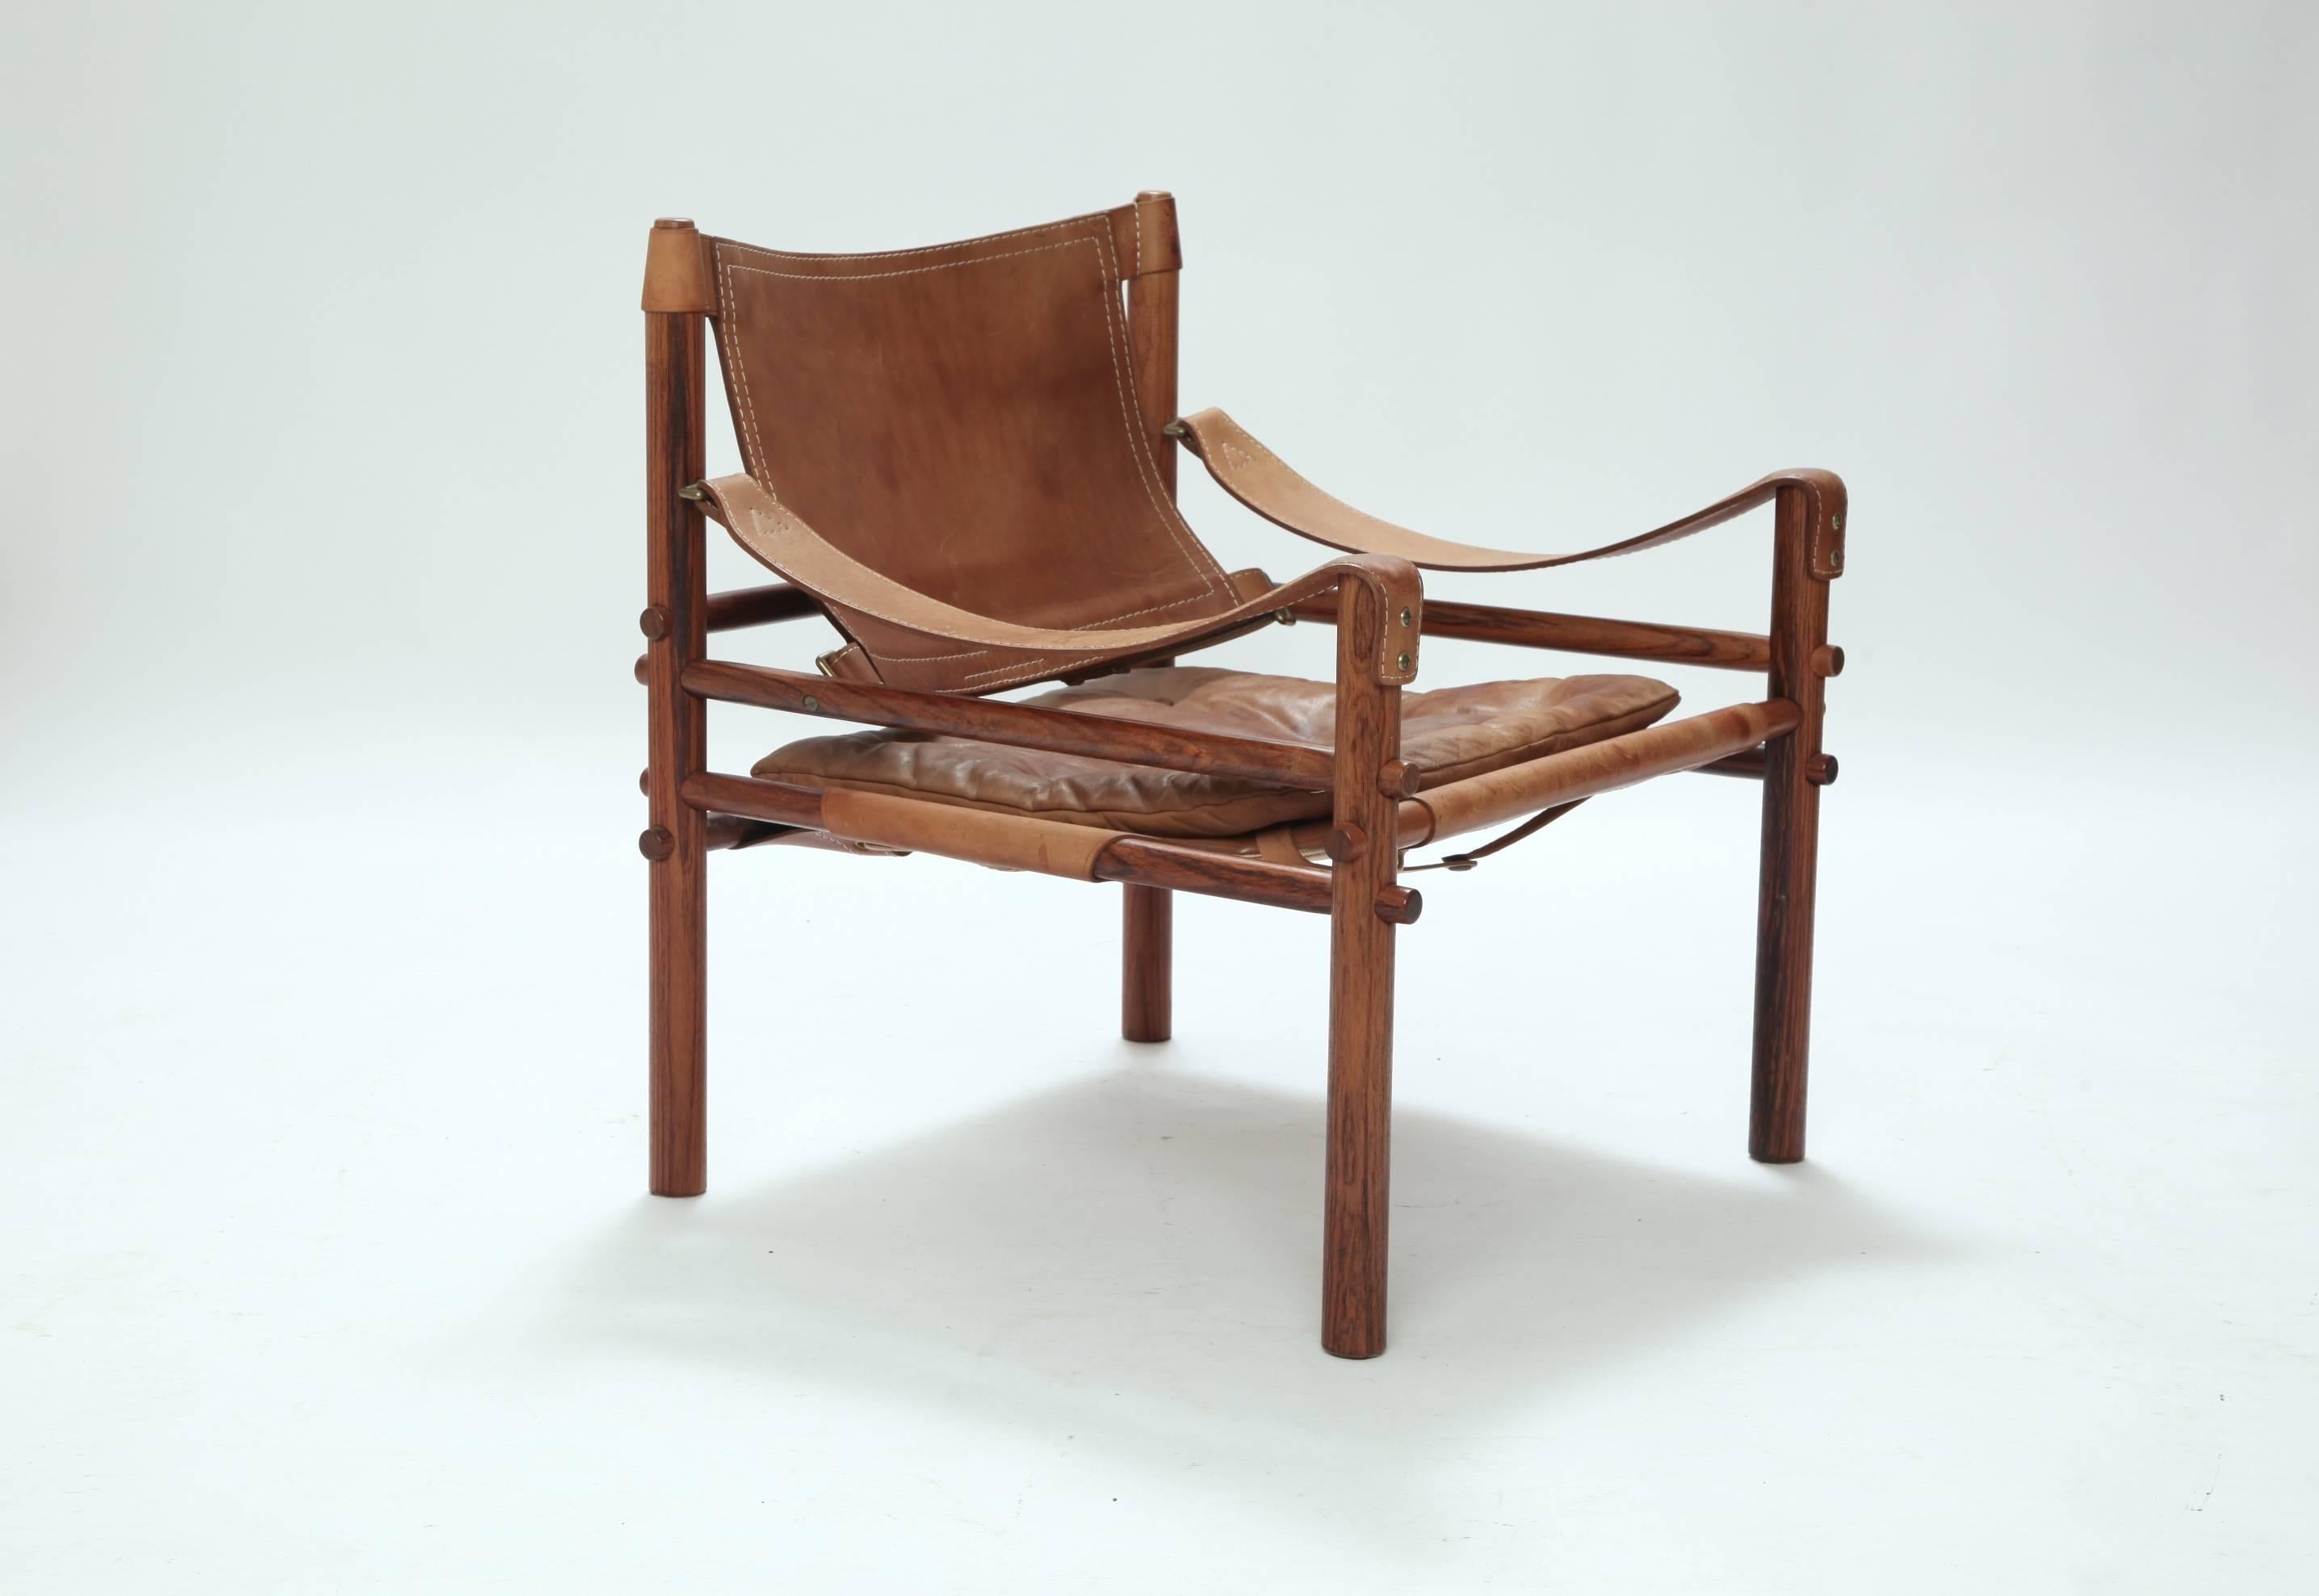 Arne Norell rosewood Safair Sirocco chair, Sweden, 1960s. Excellent condition.